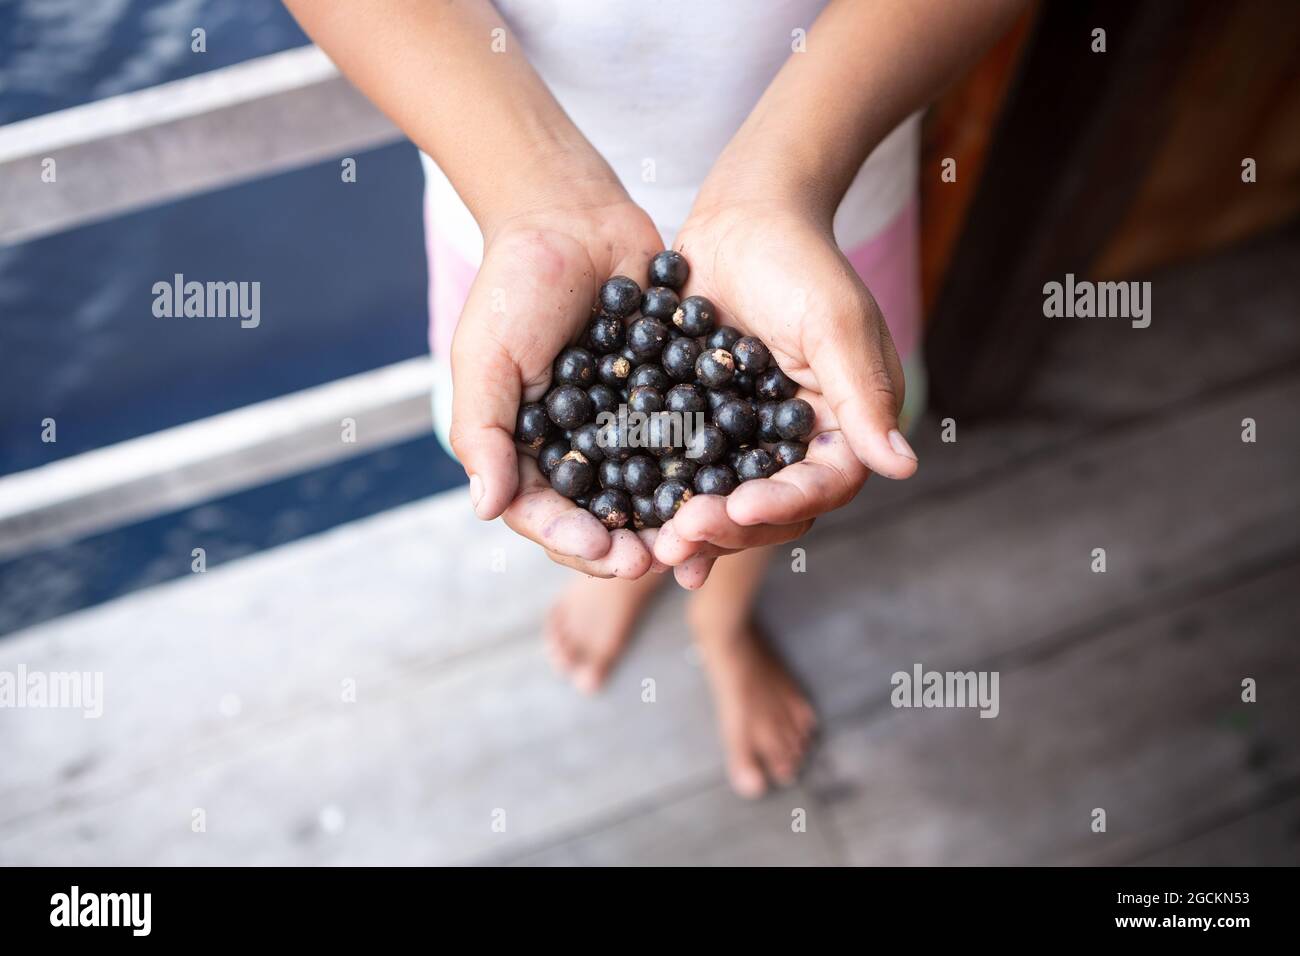 Boy hand and fresh acai berries fruit close up during harvest in the amazon rainforest, Brazil. Selective focus. Food, biodiversity, environment. Stock Photo